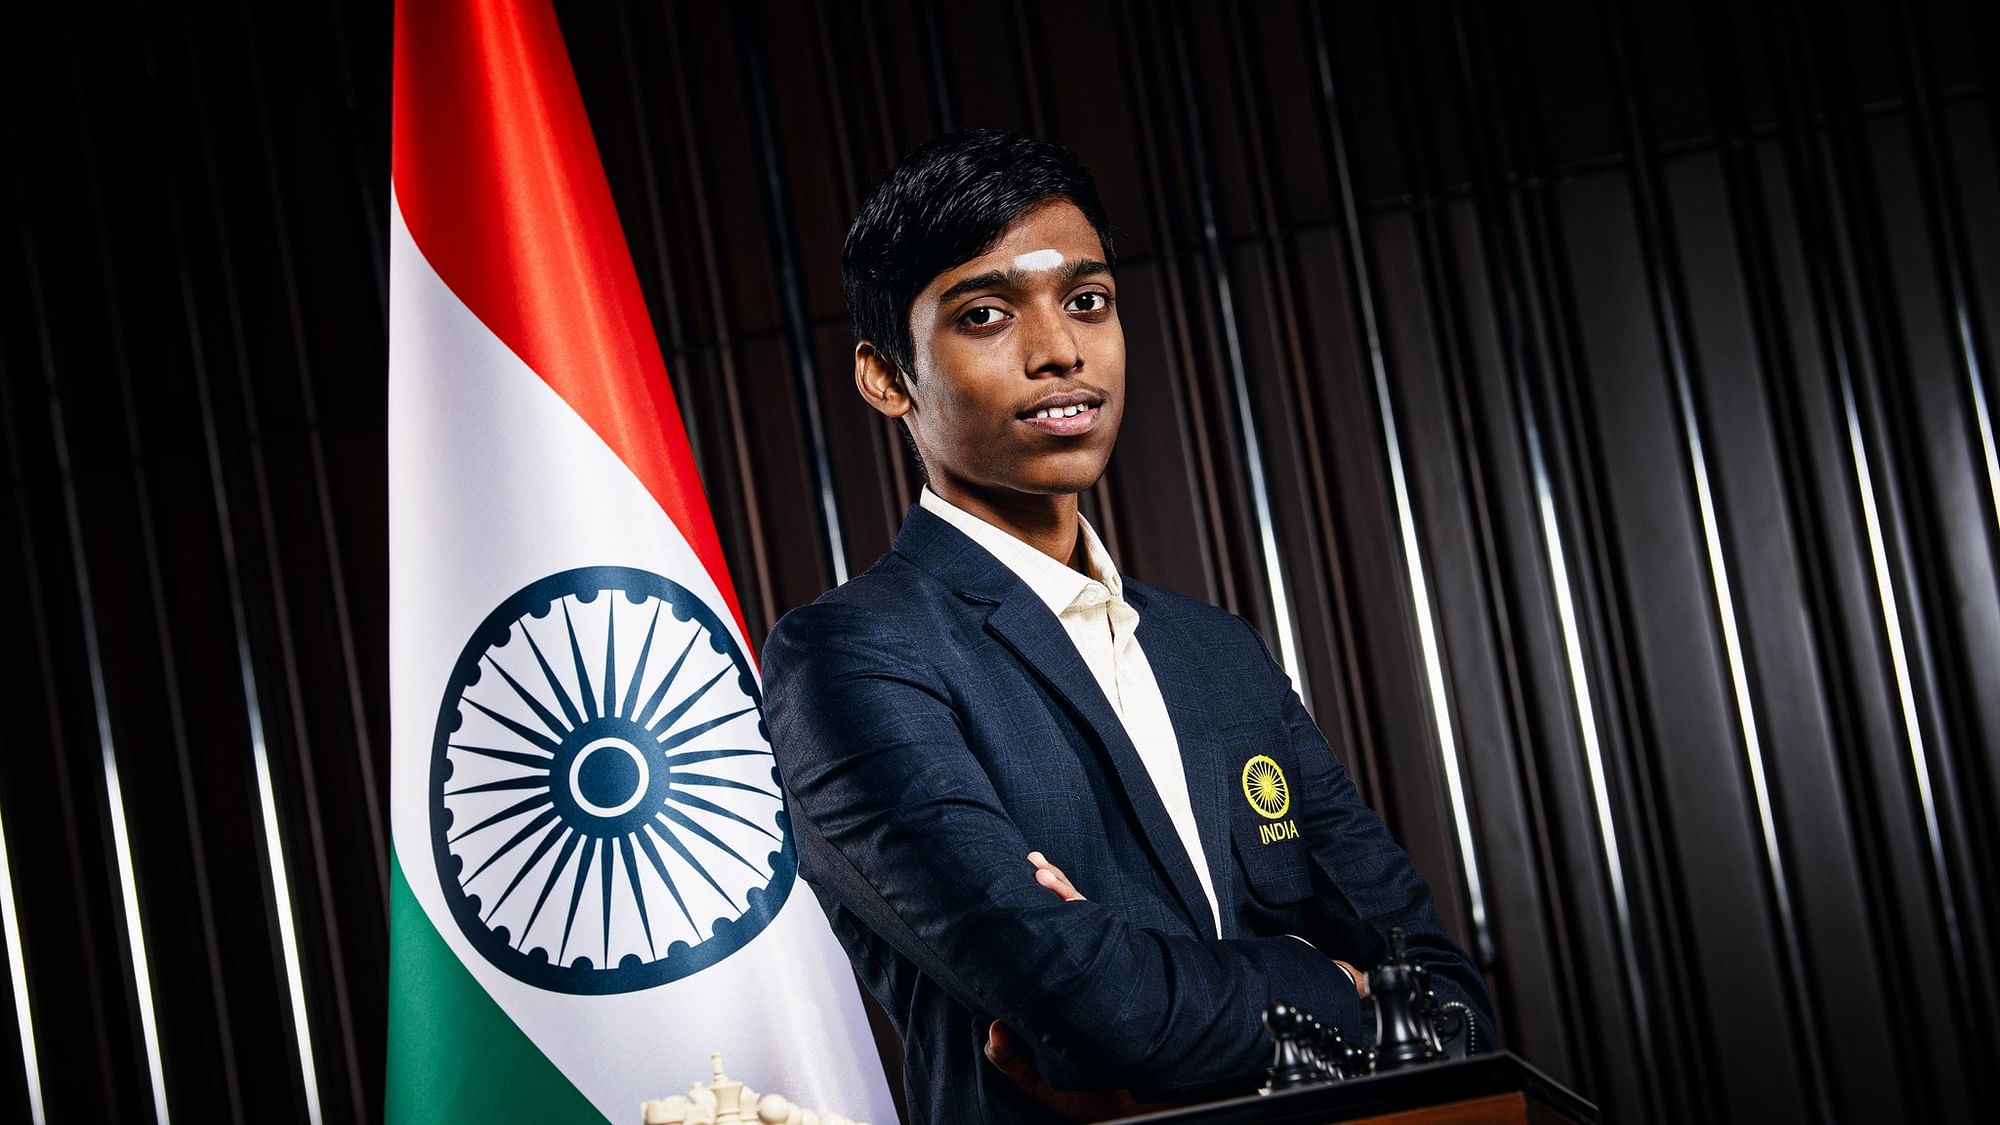 Grateful To My Family': Praggnanandhaa After Clinching Silver In FIDE Chess  World Cup (WATCH)